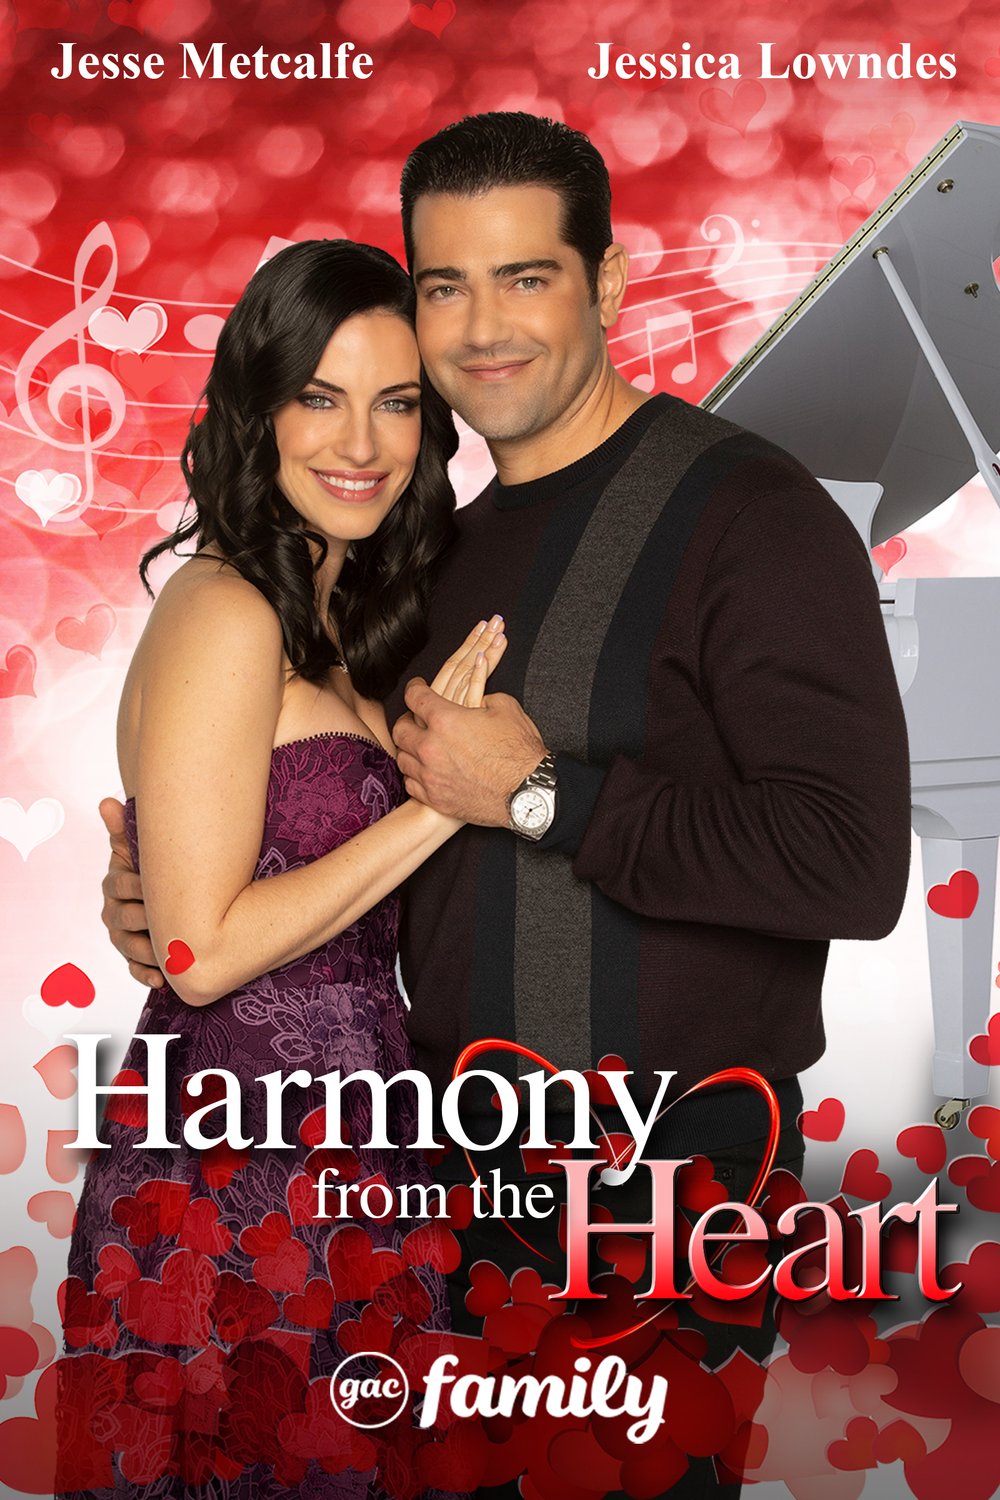 Poster of the movie Harmony from the Heart